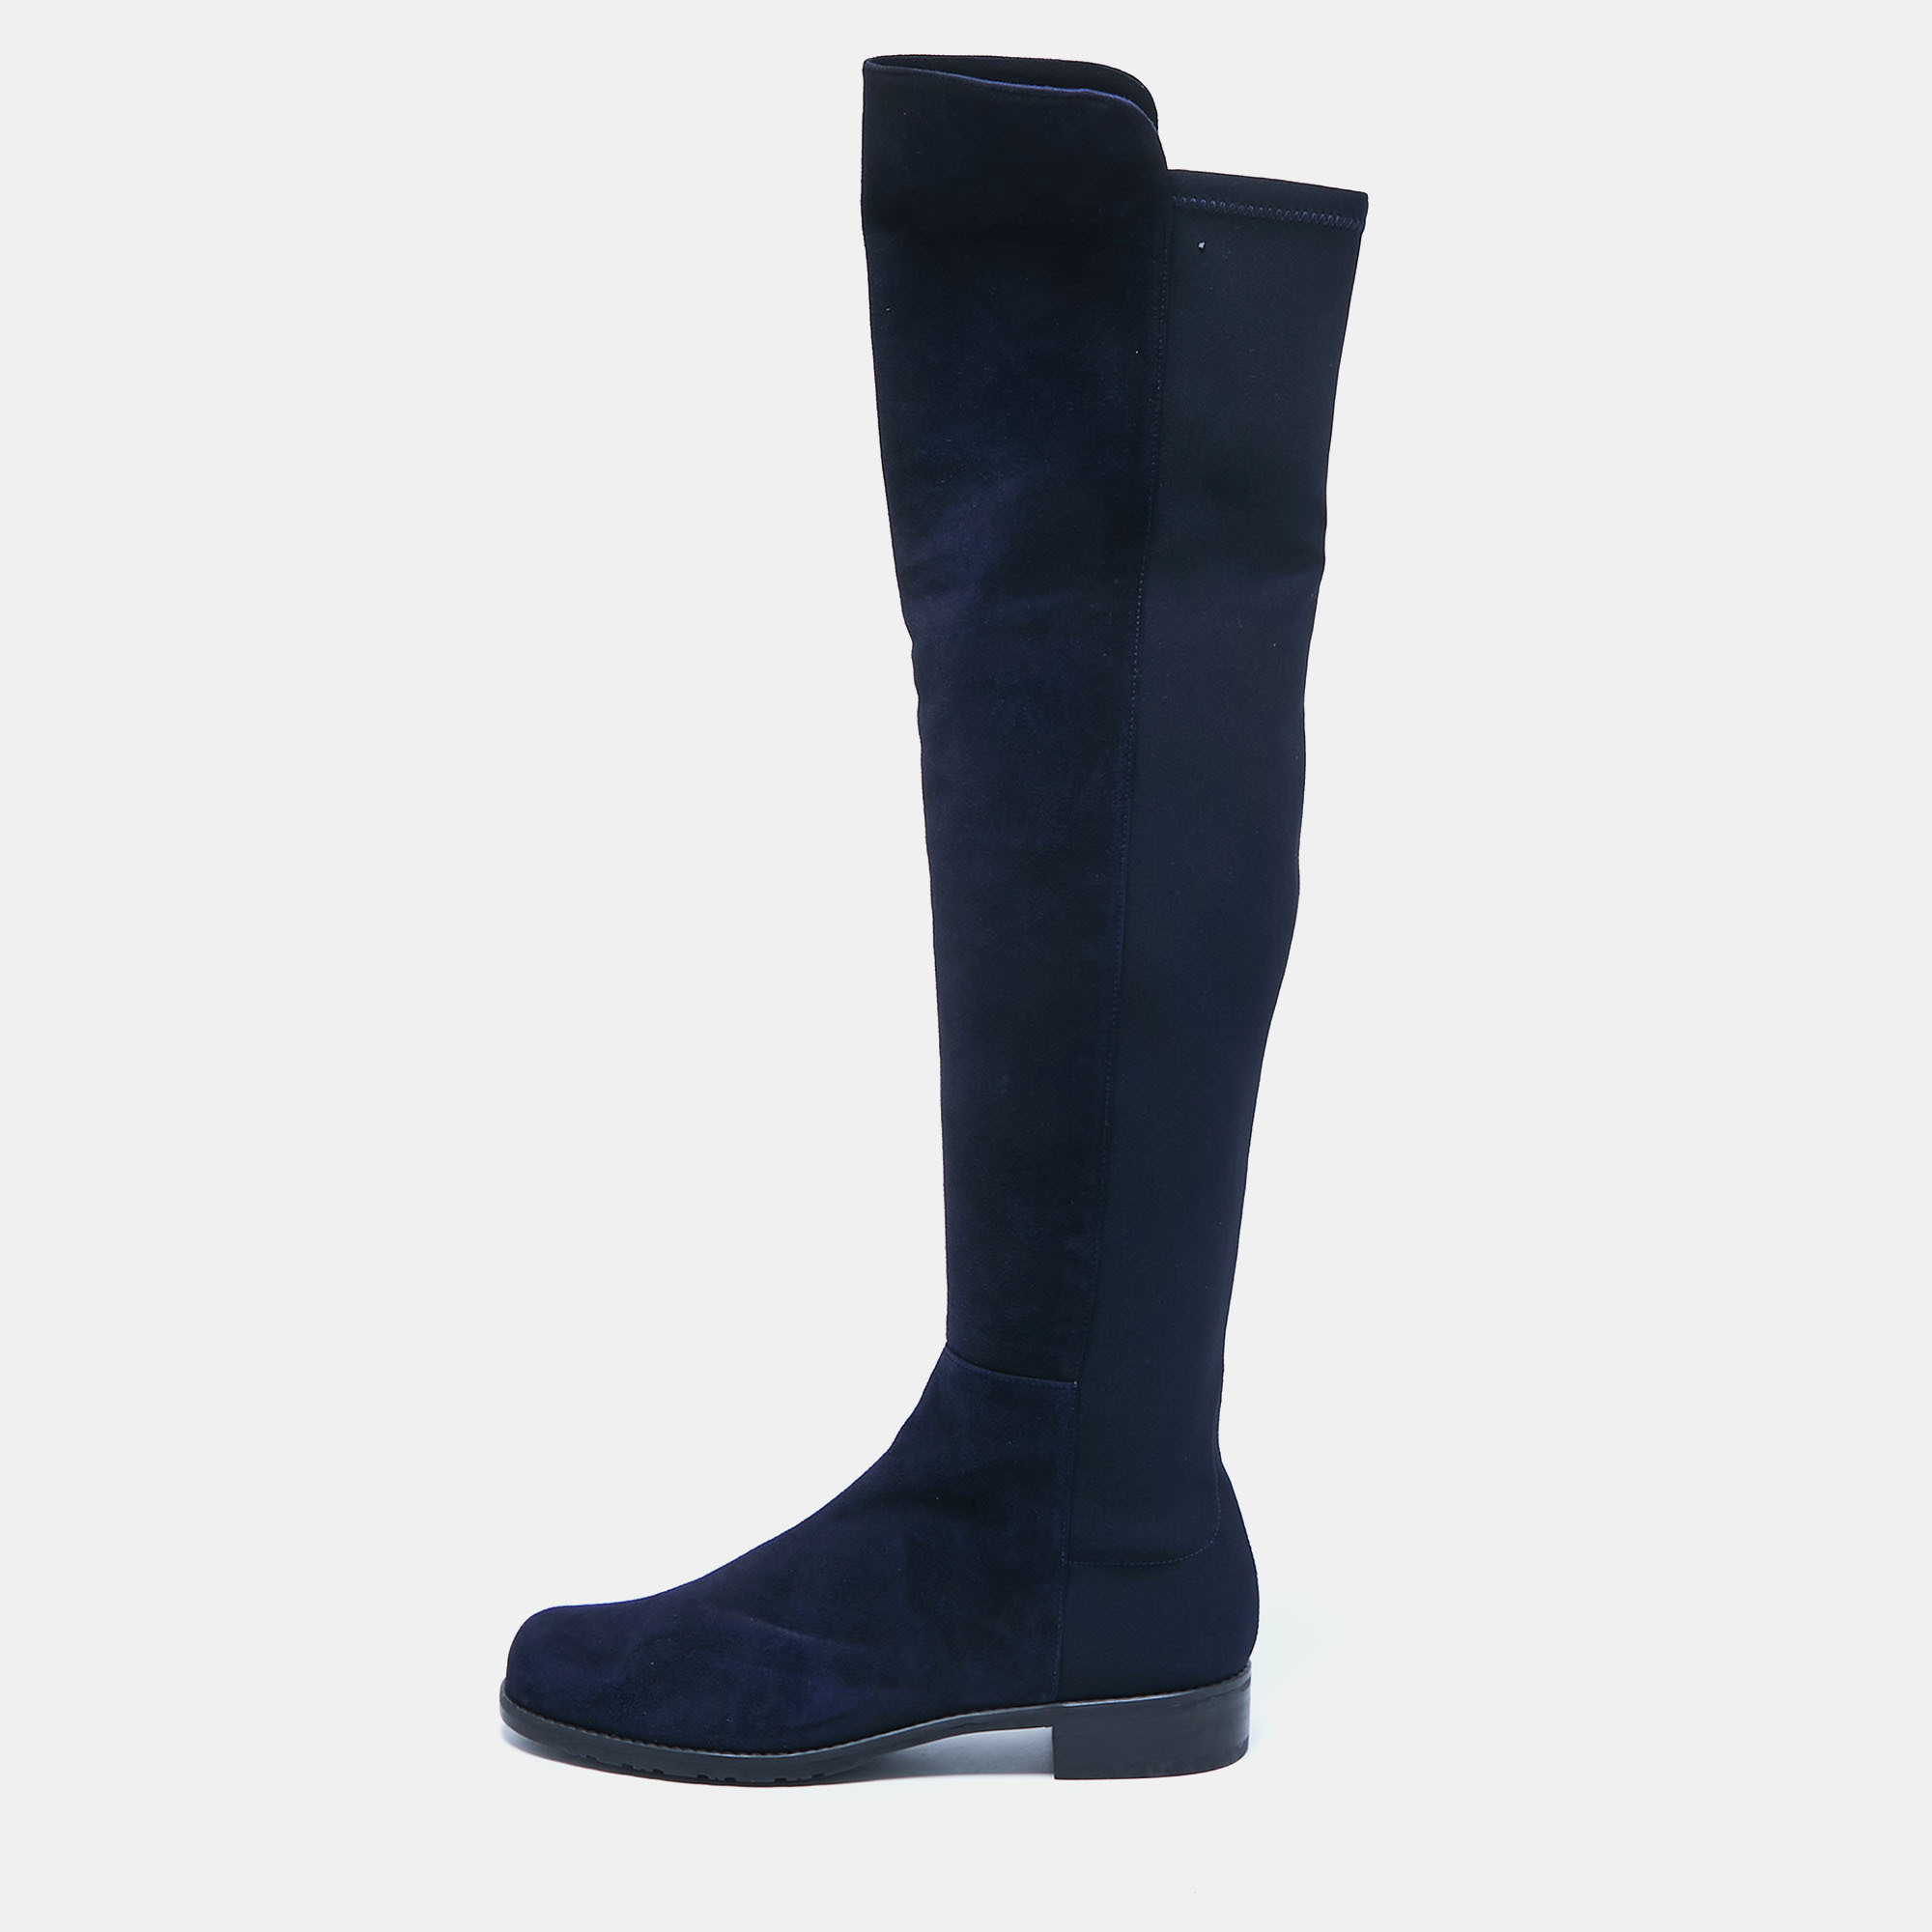 Pre-owned Stuart Weitzman Navy Blue Suede Knee Length Boots Size 40